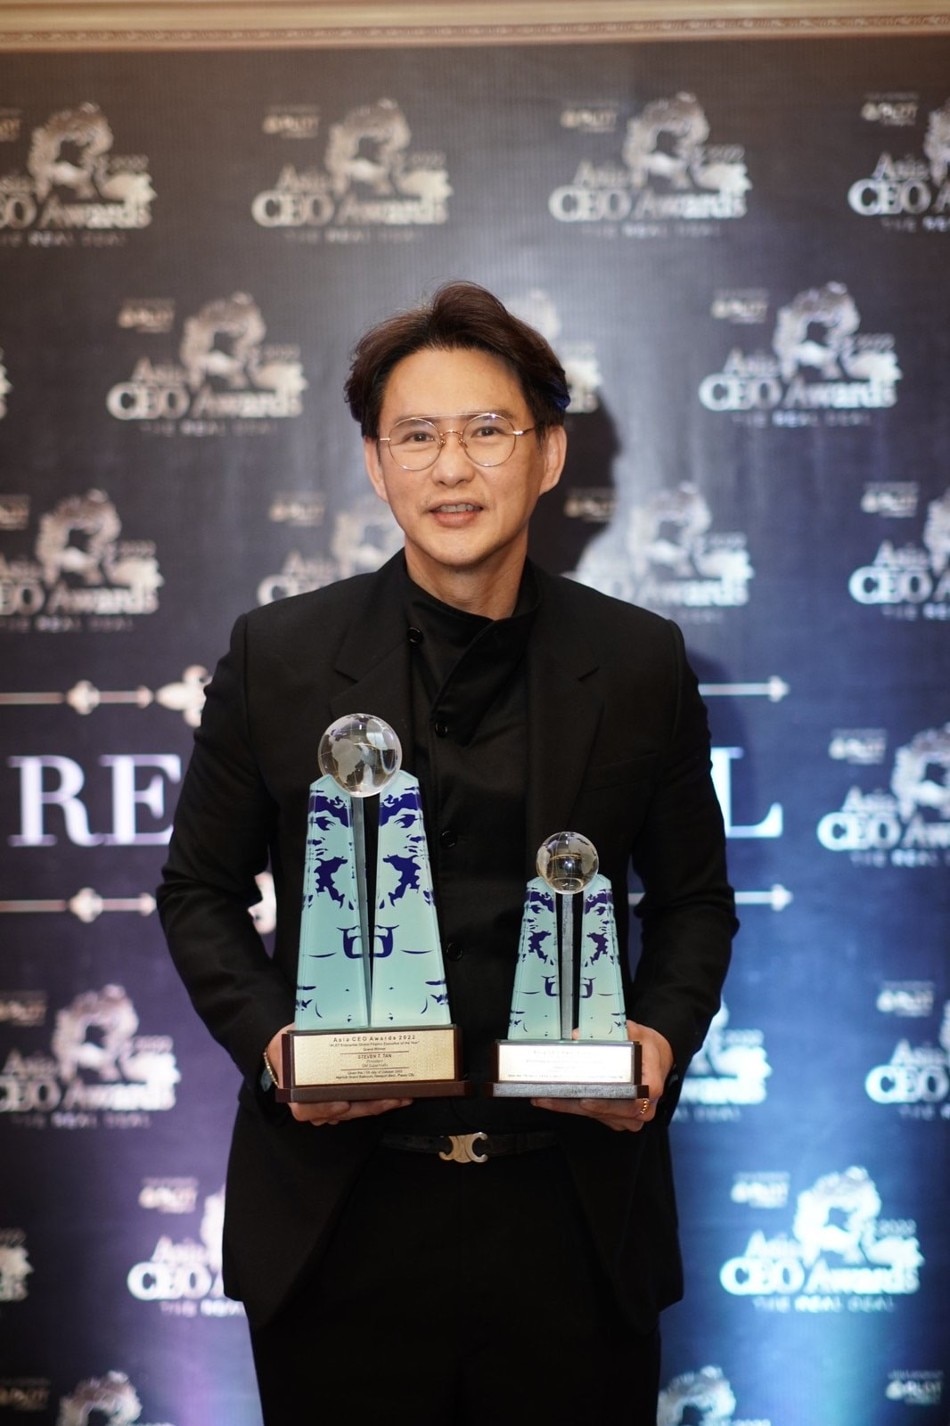 SM Supermalls President Steven Tan was named Global Filipino Executive of the Year in the 2022 Asia CEO Awards. Photo source: SM Prime